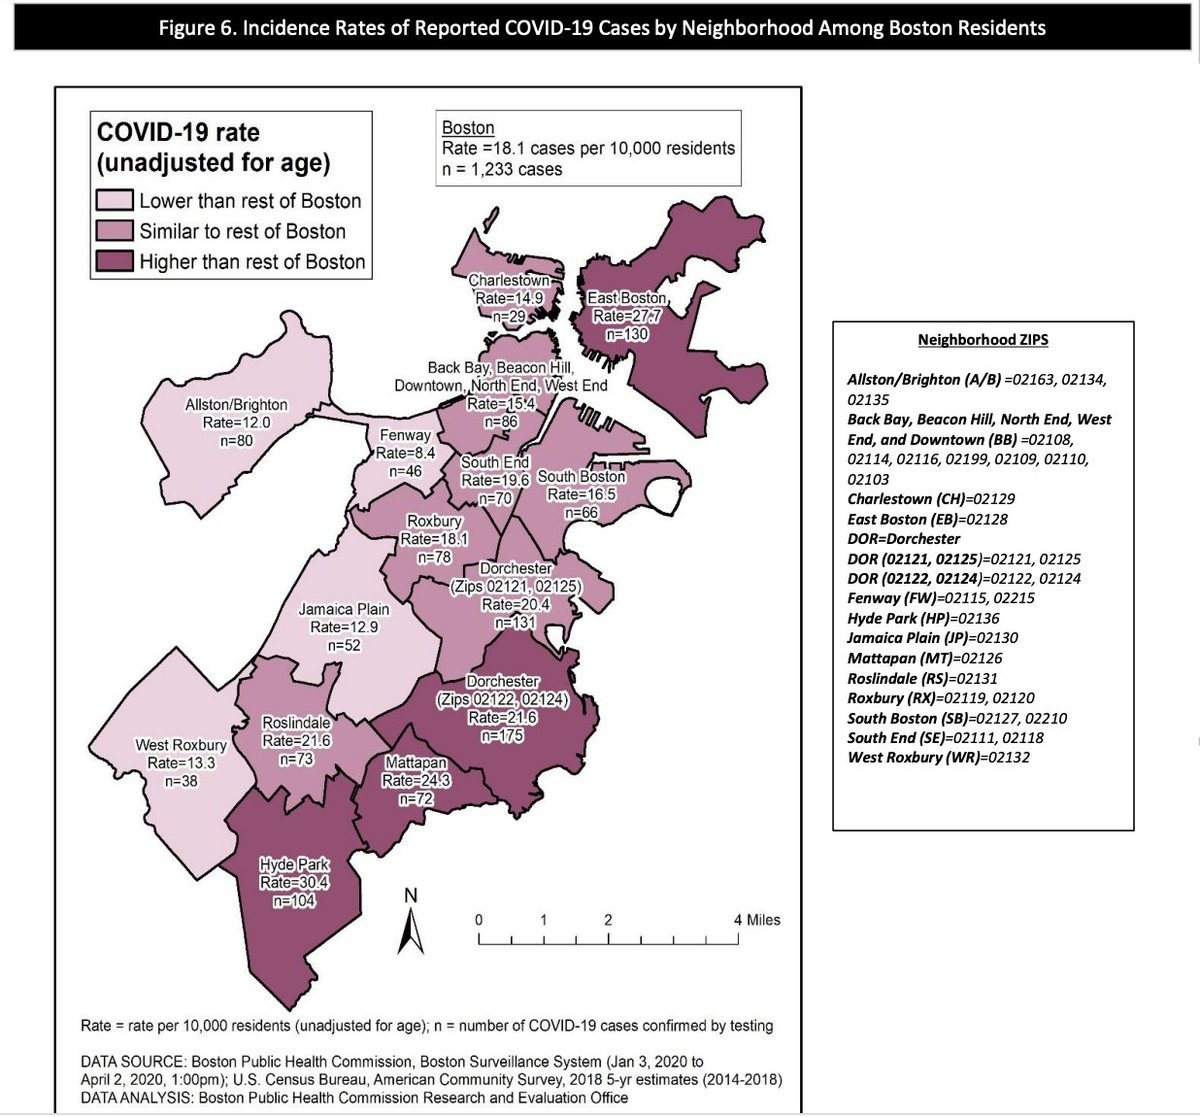 The Dorchester & Mattapan zip codes that make up the majority of my district are reporting higher rates of COVID-19 than citywide (as well as HP and Eastie).Our neighborhoods that already suffer from deep economic & health inequities are suffering the most from this pandemic.